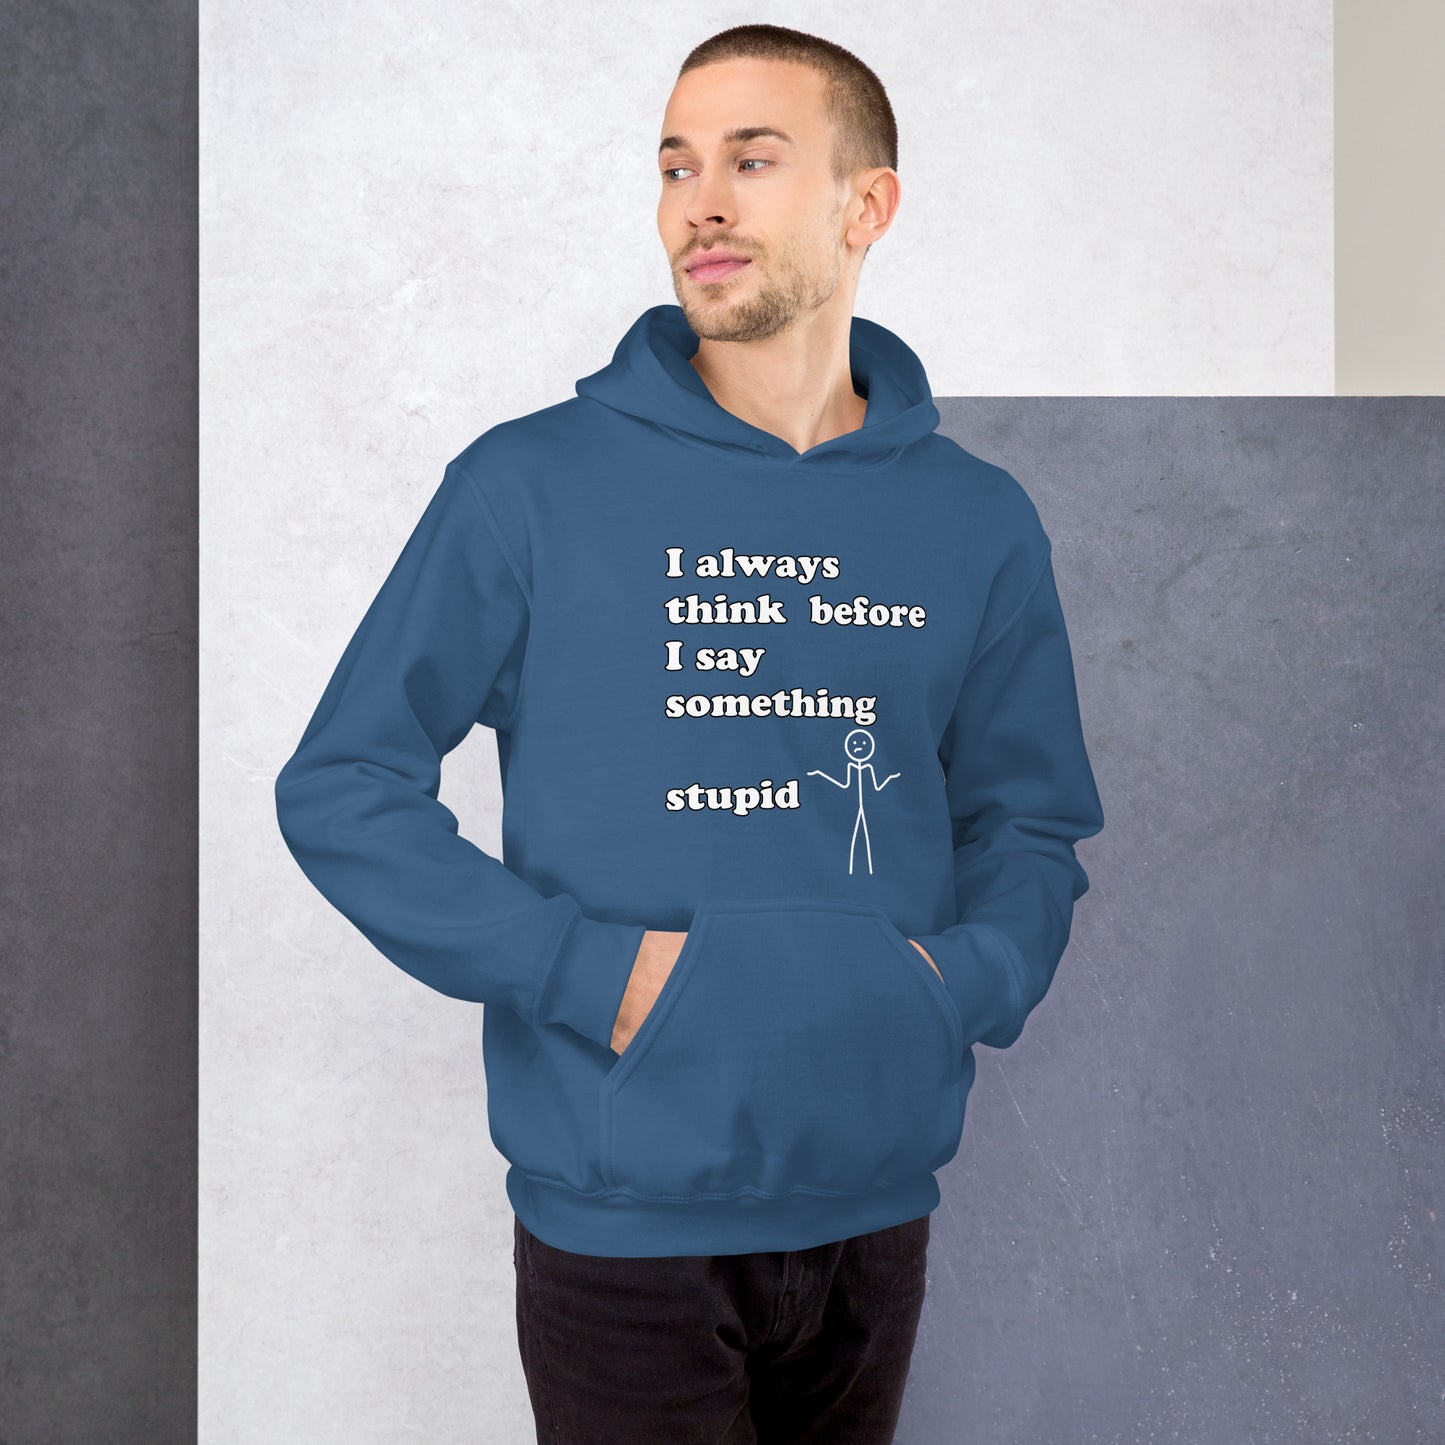 Man with indigo blue hoodie with text "I always think before I say something stupid"